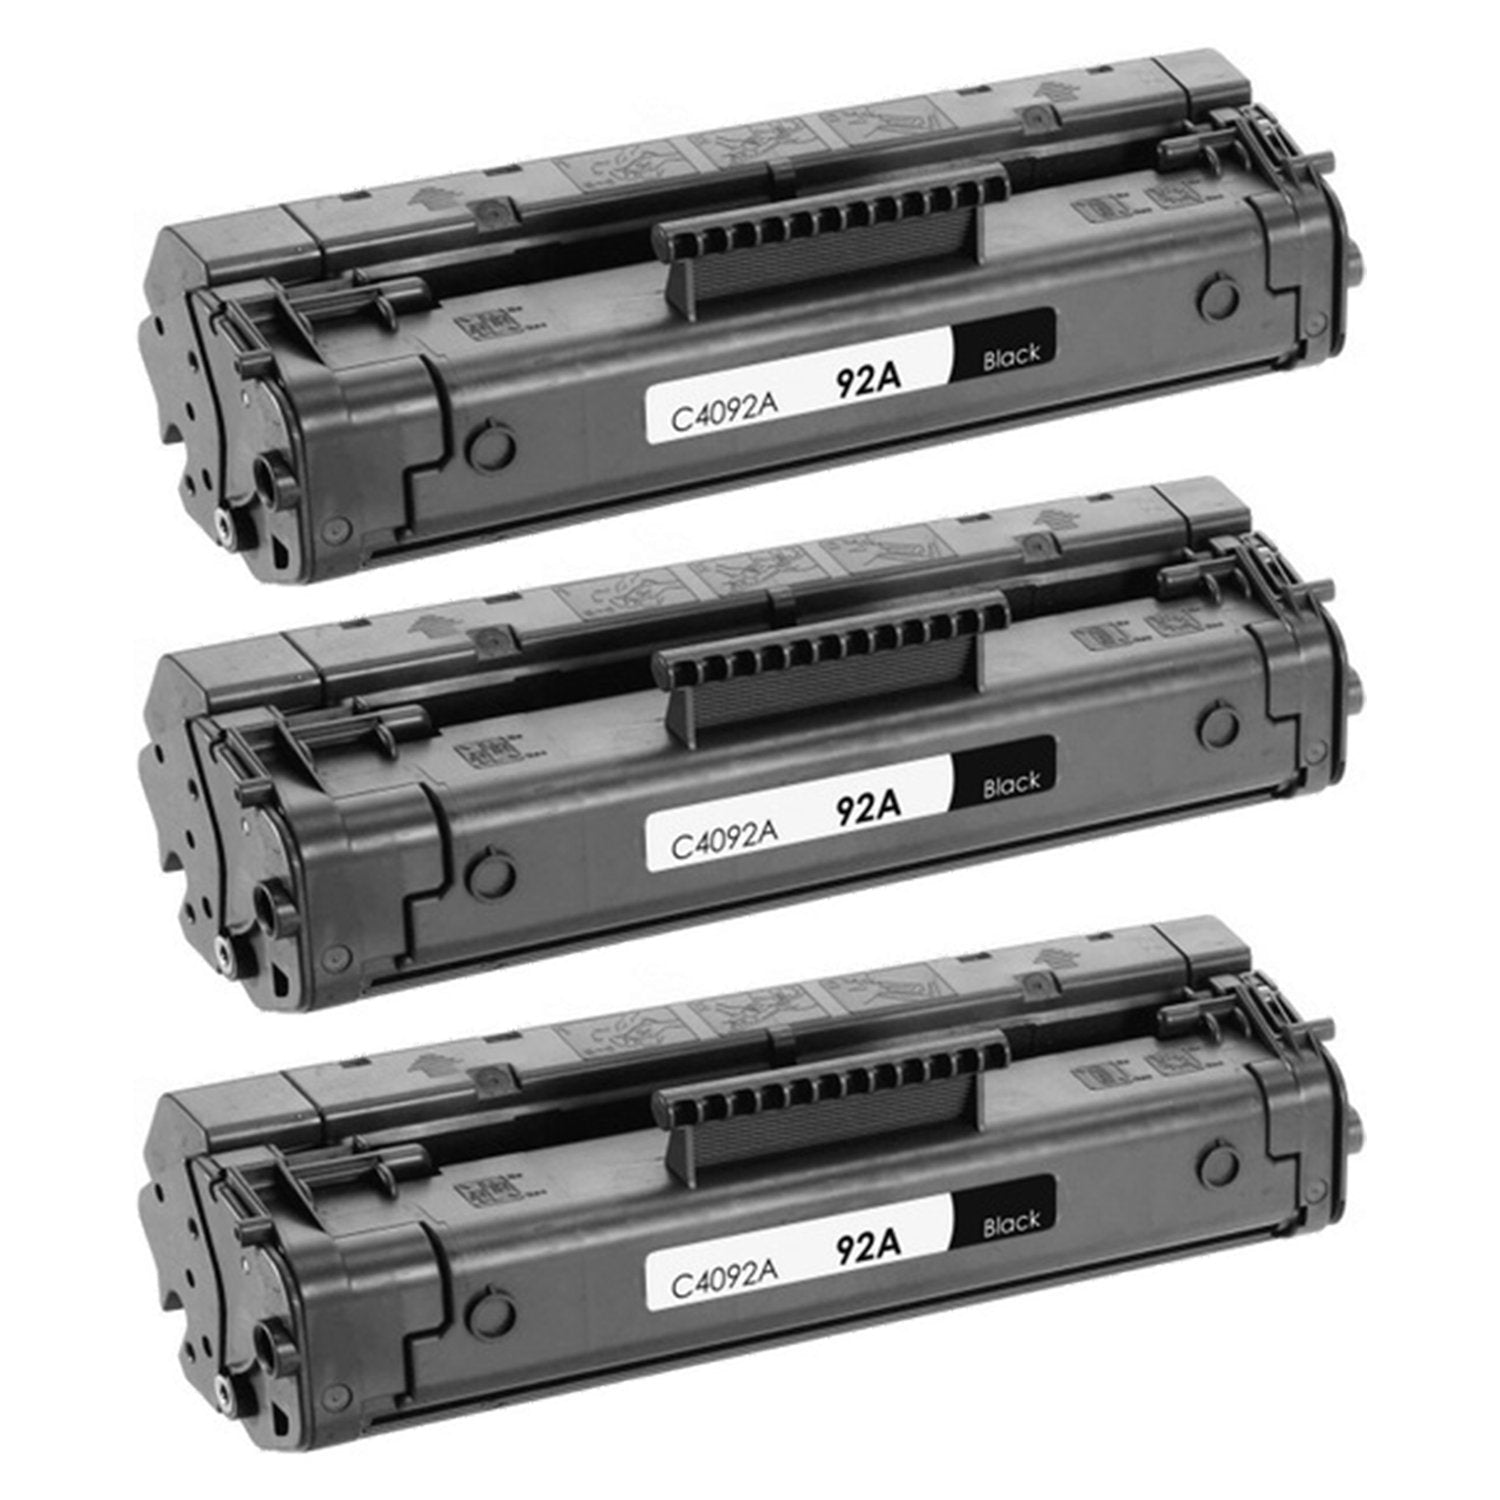 Absolute Toner Absolute Toner Compatible Black Toner Cartridge for HP 92A (C4092A) HP Toner Cartridges